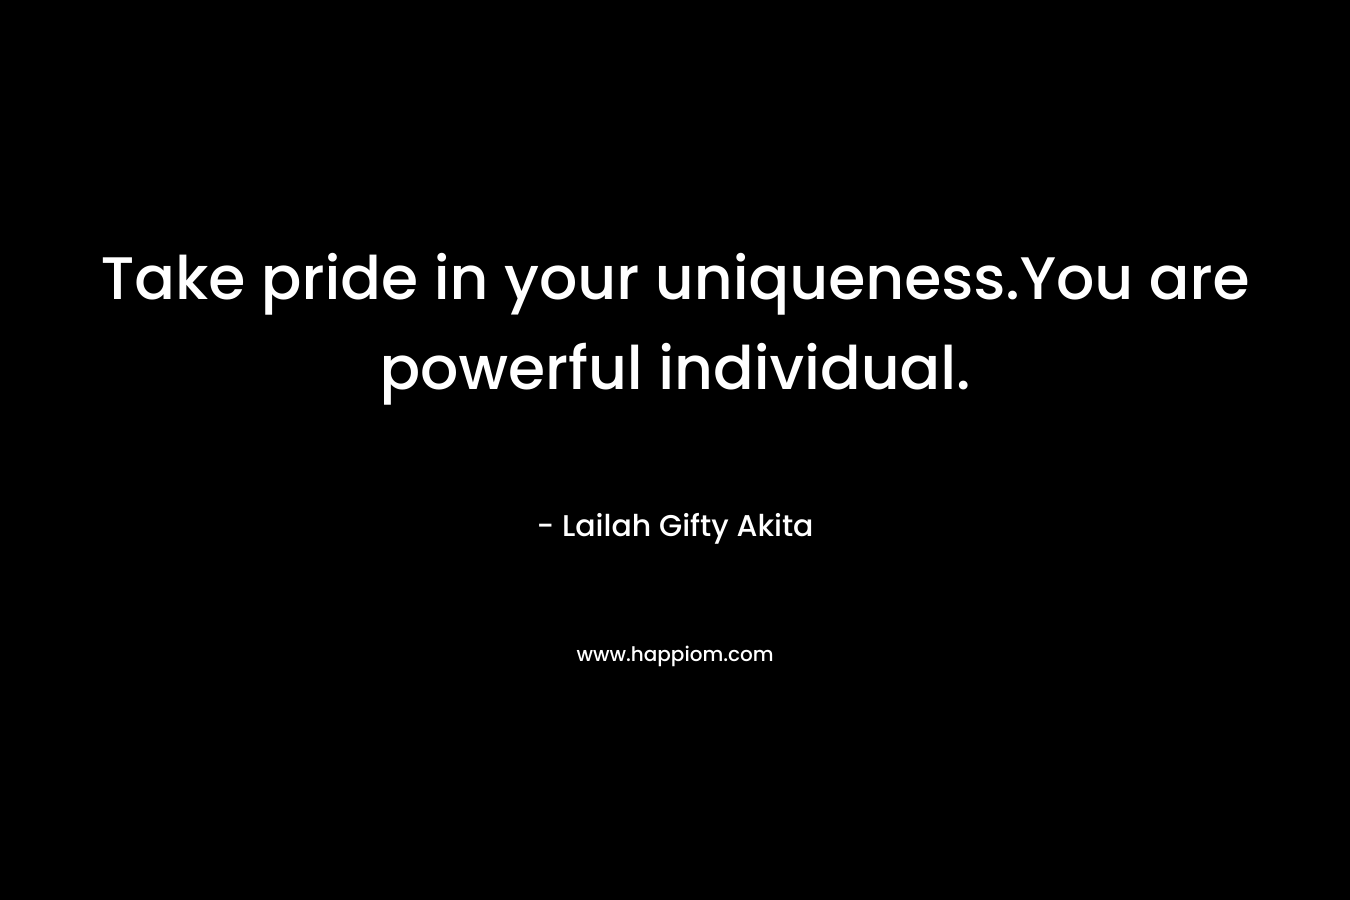 Take pride in your uniqueness.You are powerful individual. – Lailah Gifty Akita